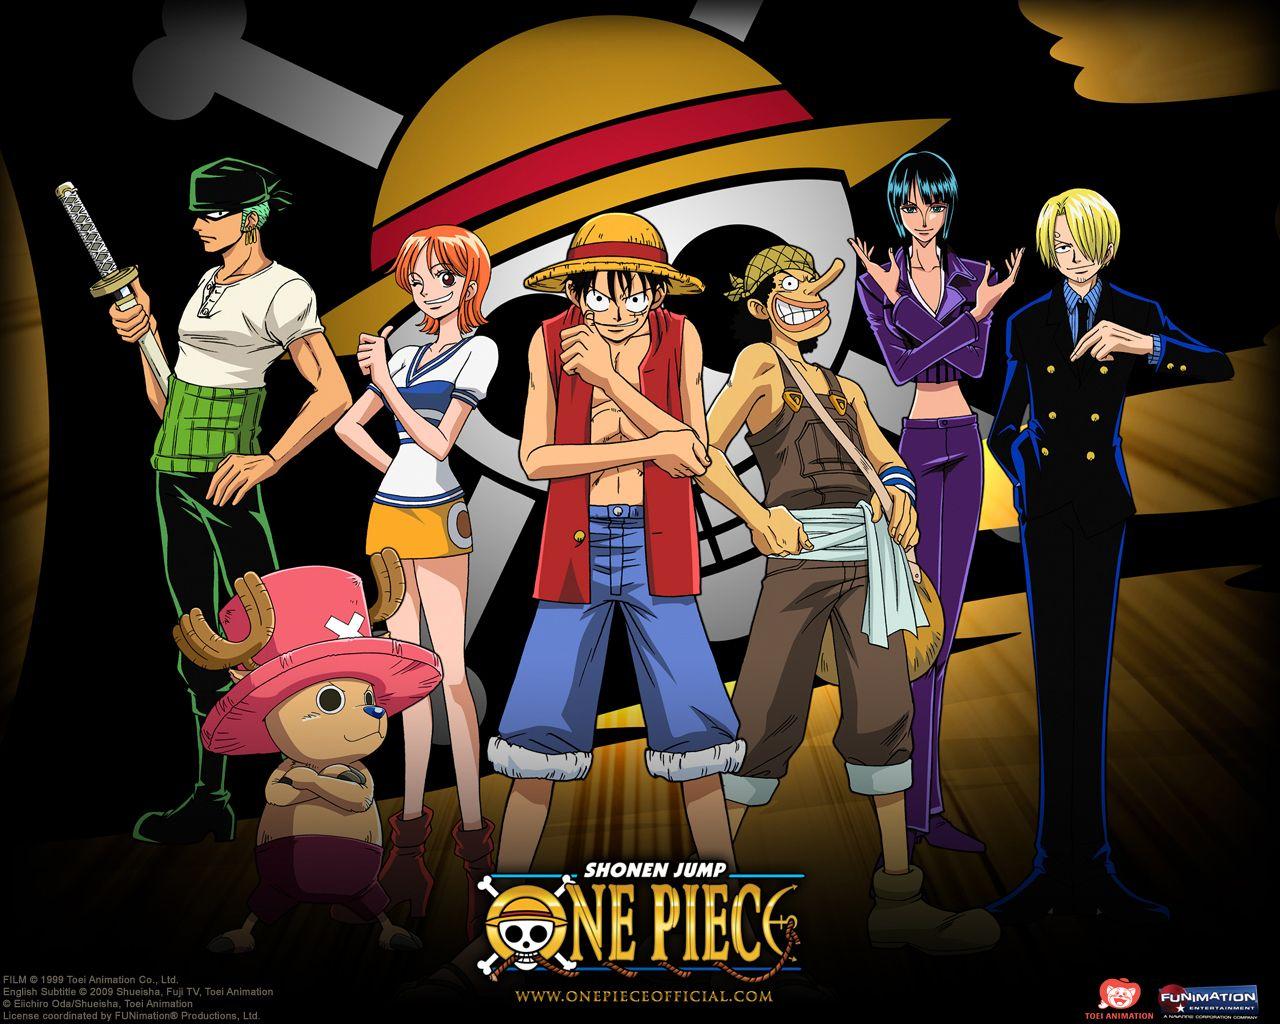 One Piece Anime Wallpapers Top Free One Piece Anime Backgrounds Wallpaperaccess